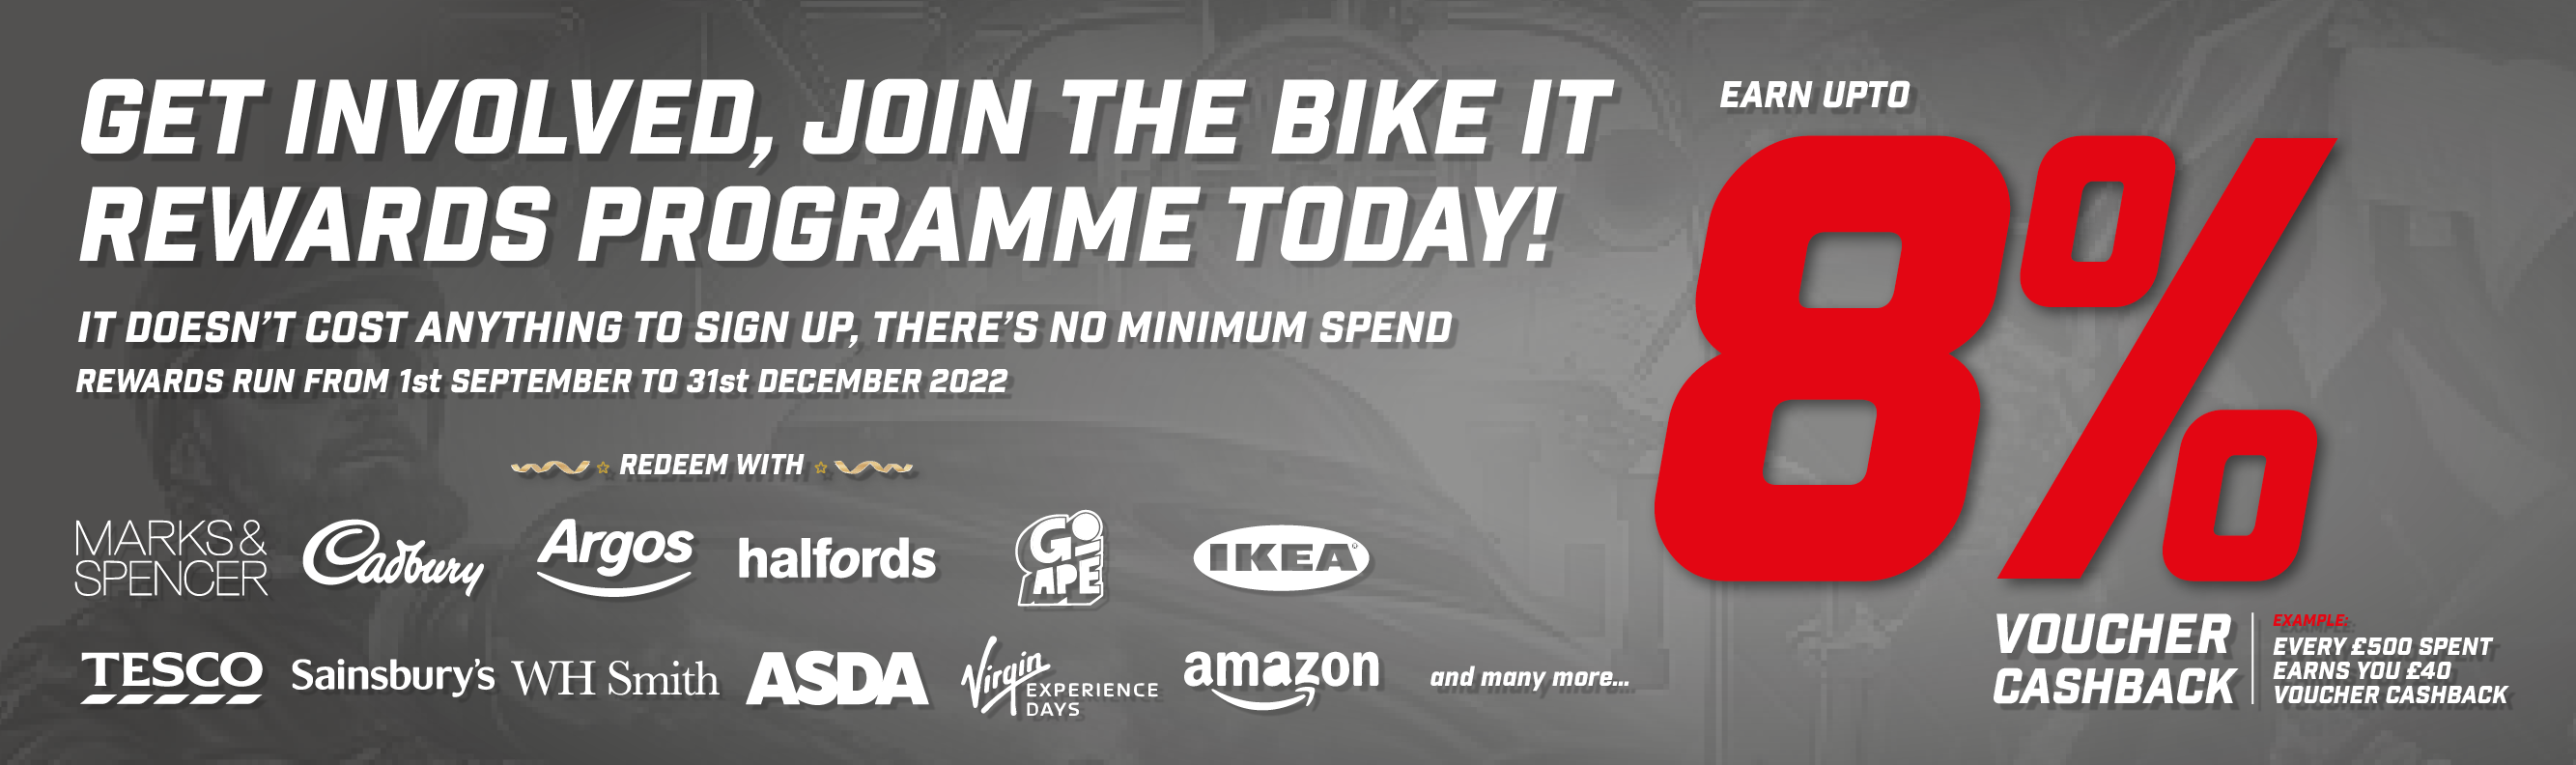 Earn up to 8% Voucher Cashback with Bike It Rewards - Get involved!